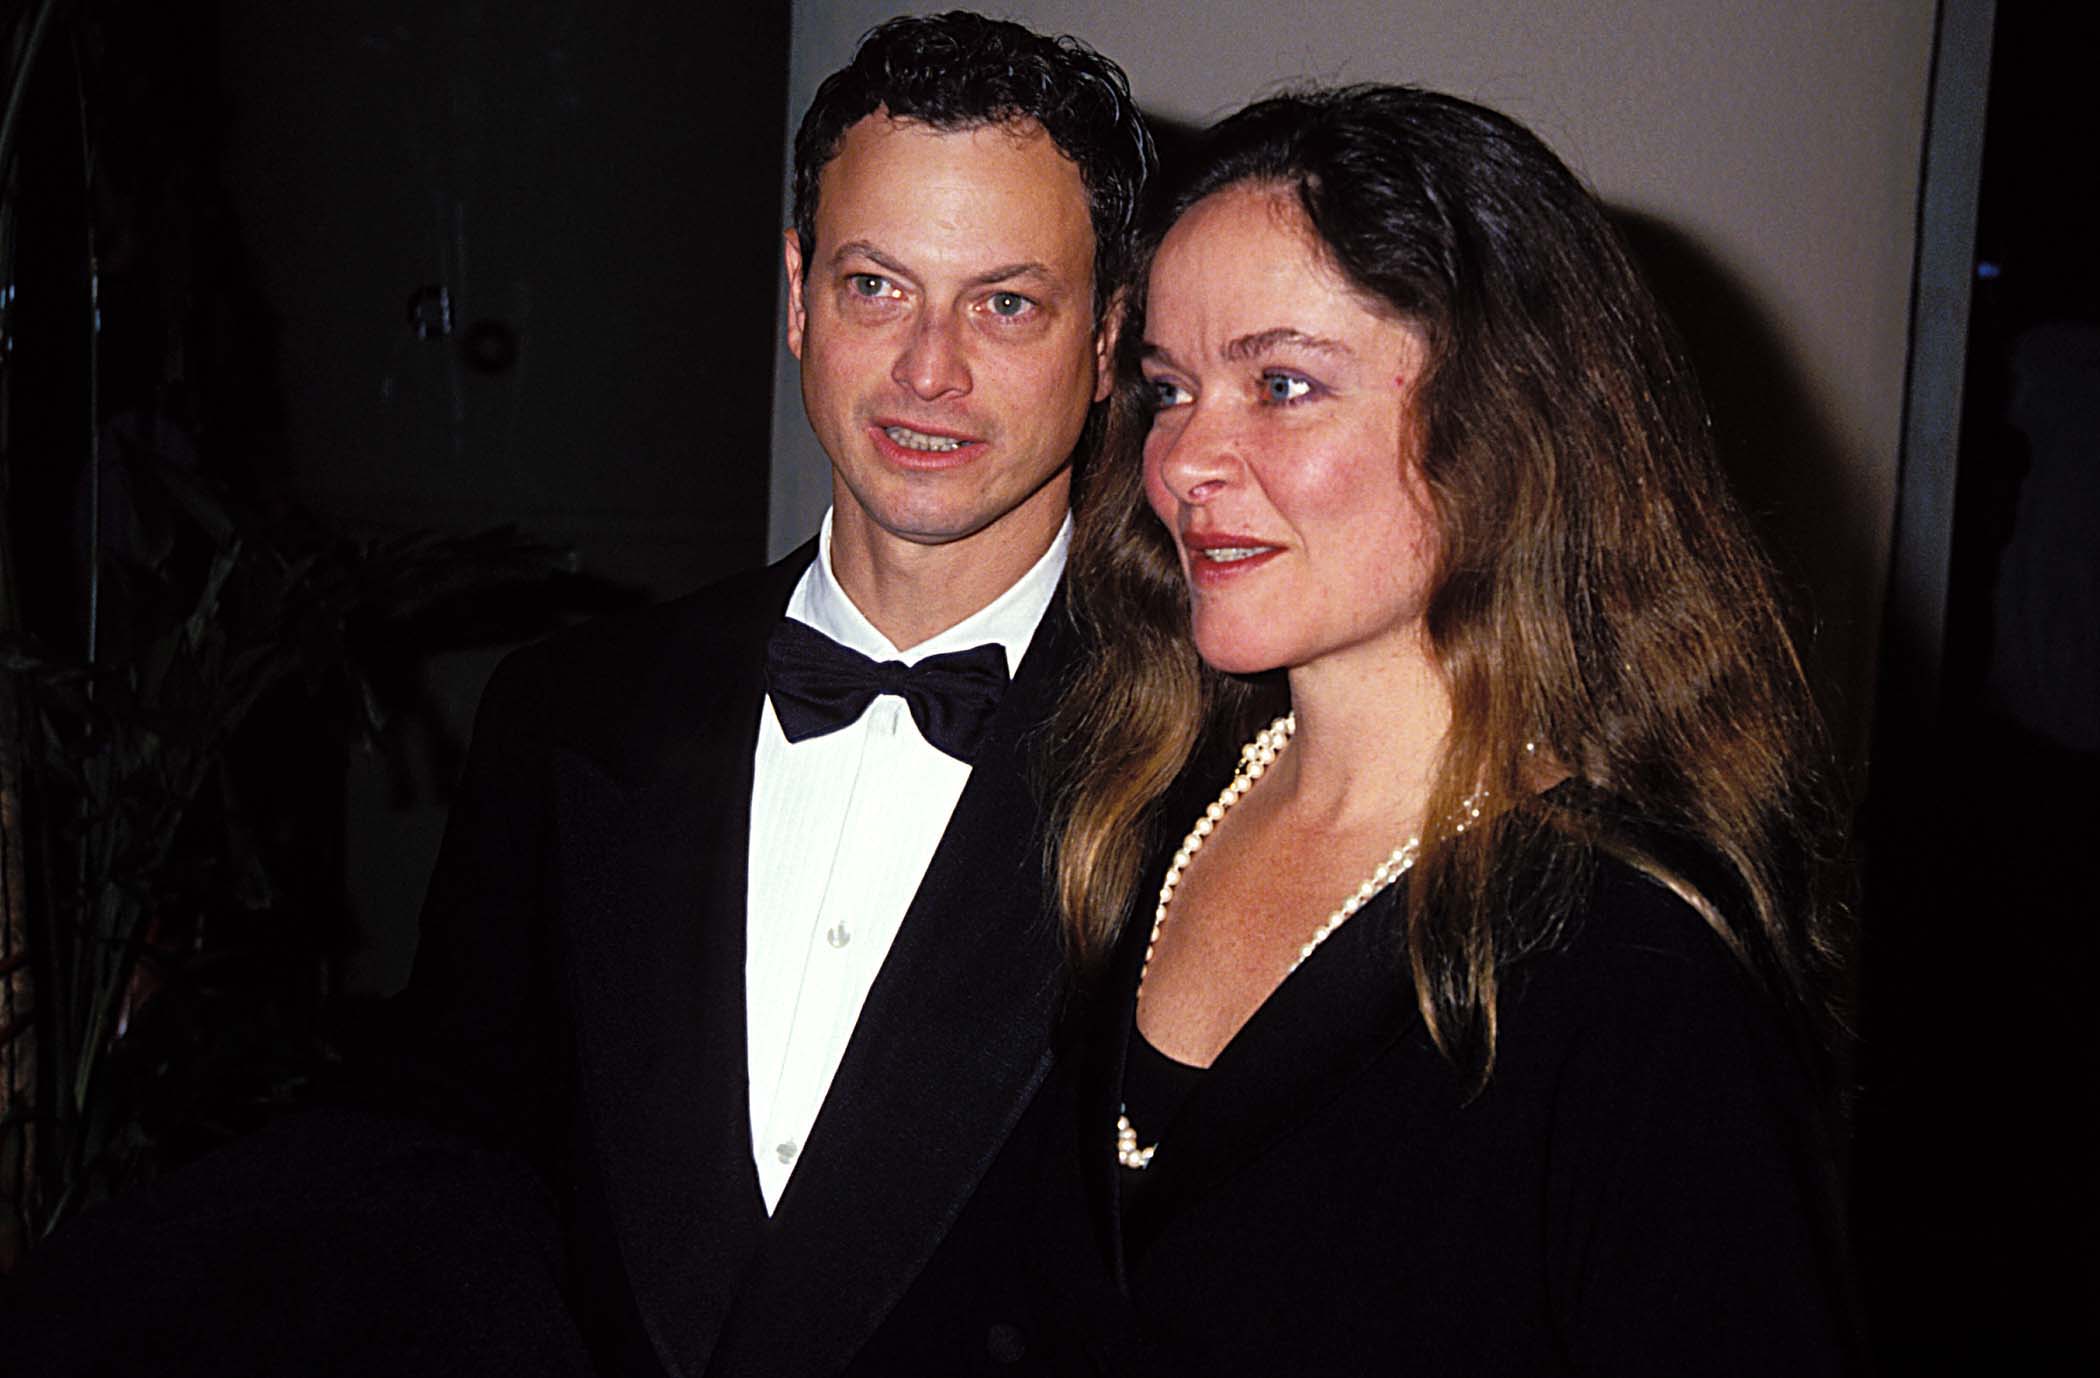 Gary Sinise and wife Moira Harris at the AFI Tribute to Steven Spielberg held at Beverly Hilton Hotel in Beverly Hills, CA, United States. | Source: Getty Images